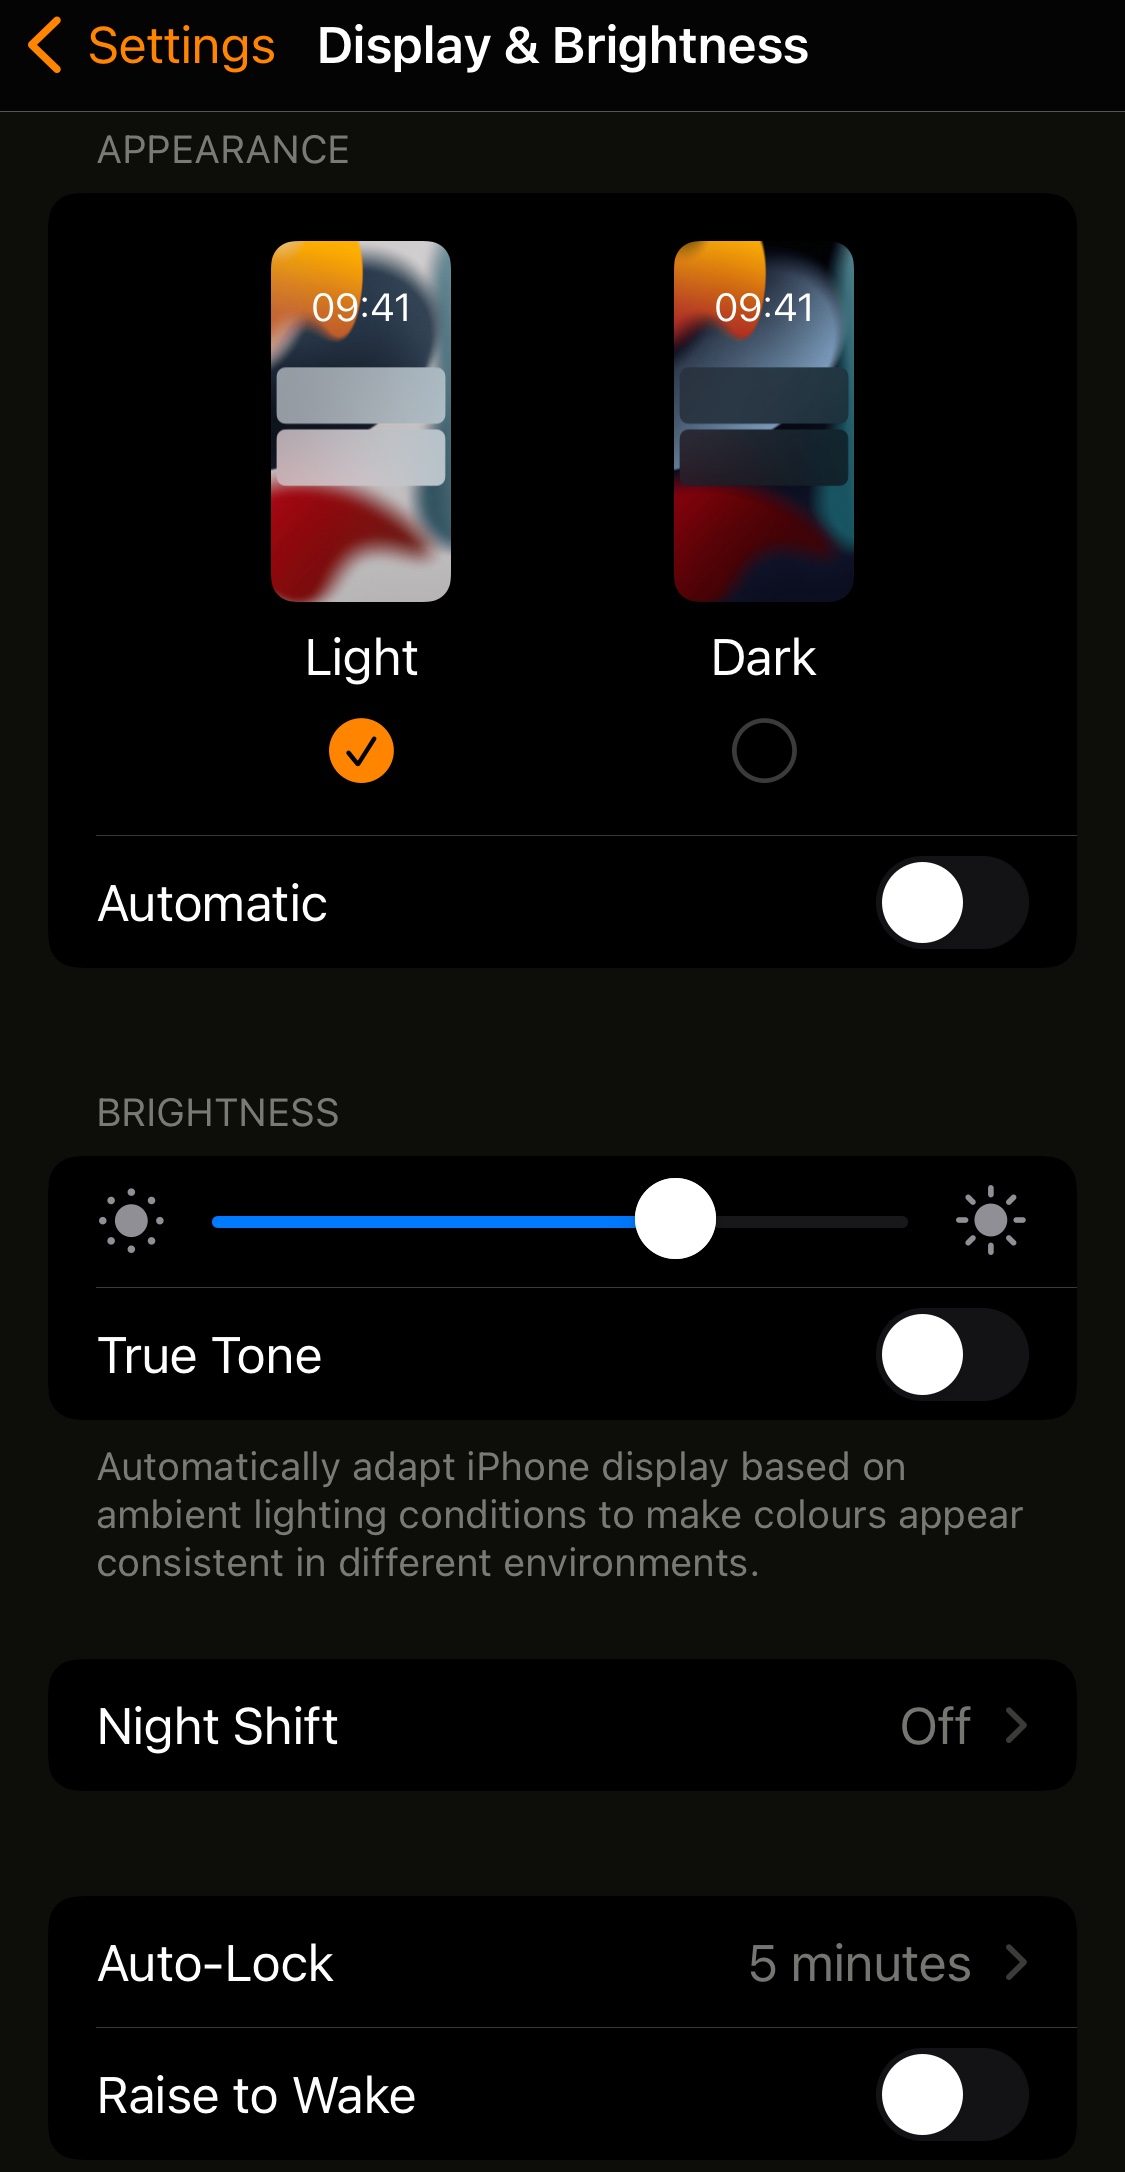 iPhone Apps with black backgrounds? - Apple Community